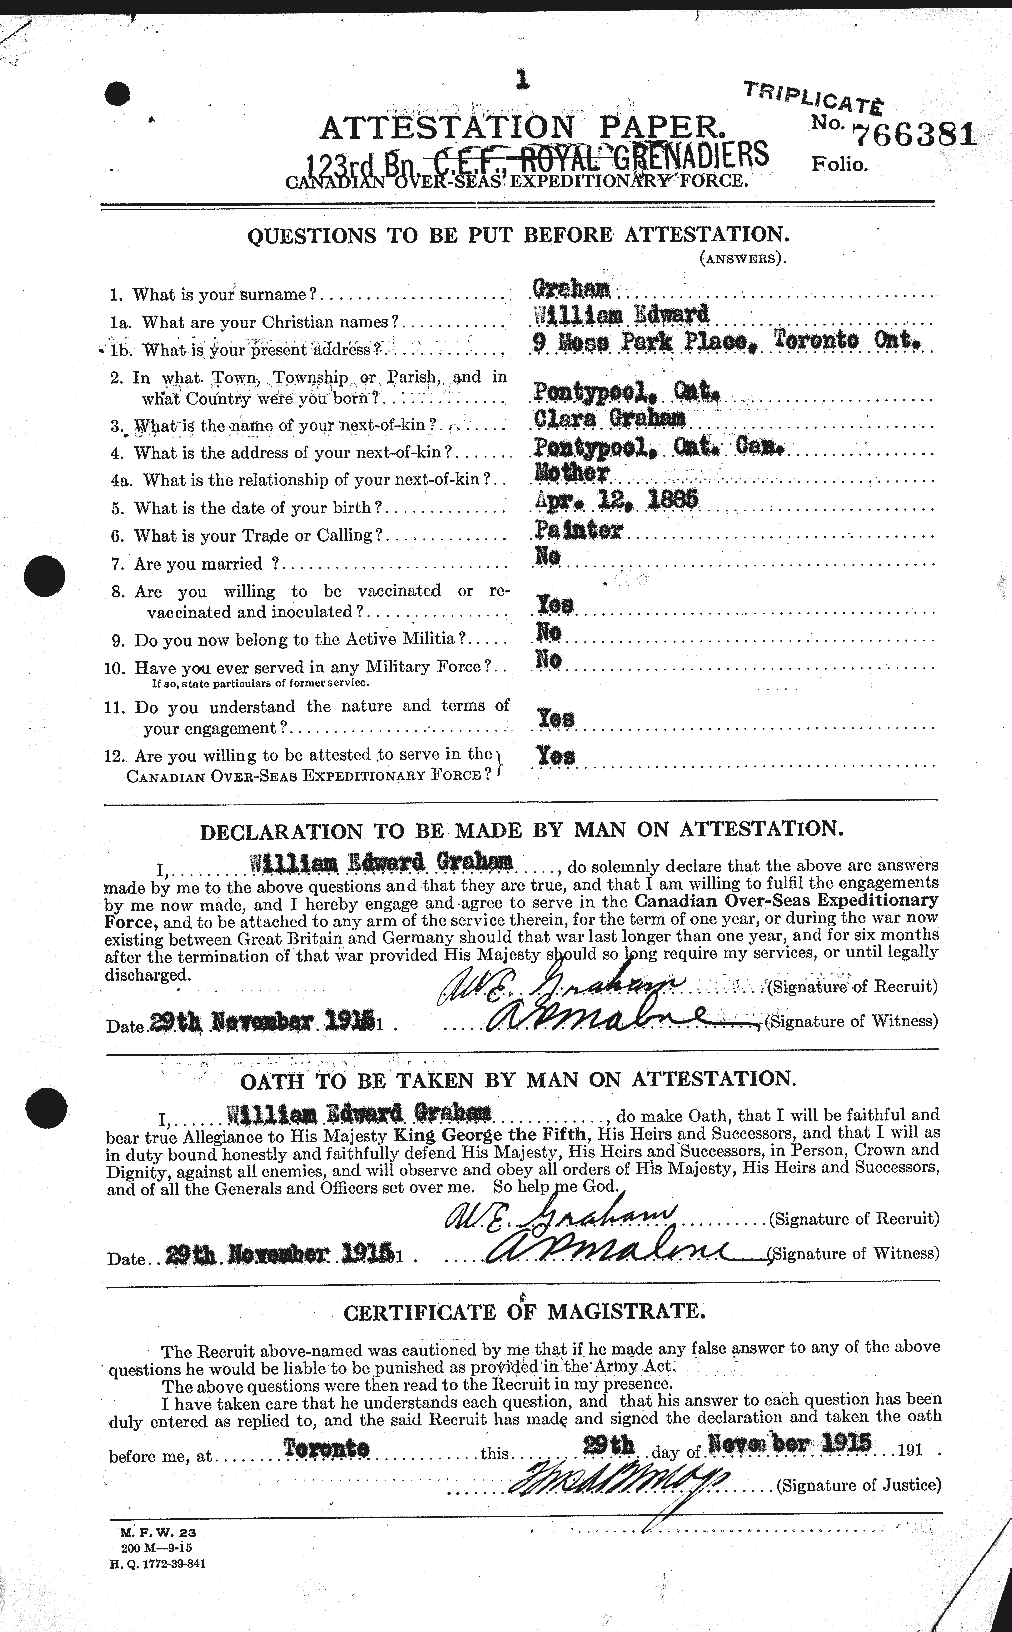 Personnel Records of the First World War - CEF 357983a